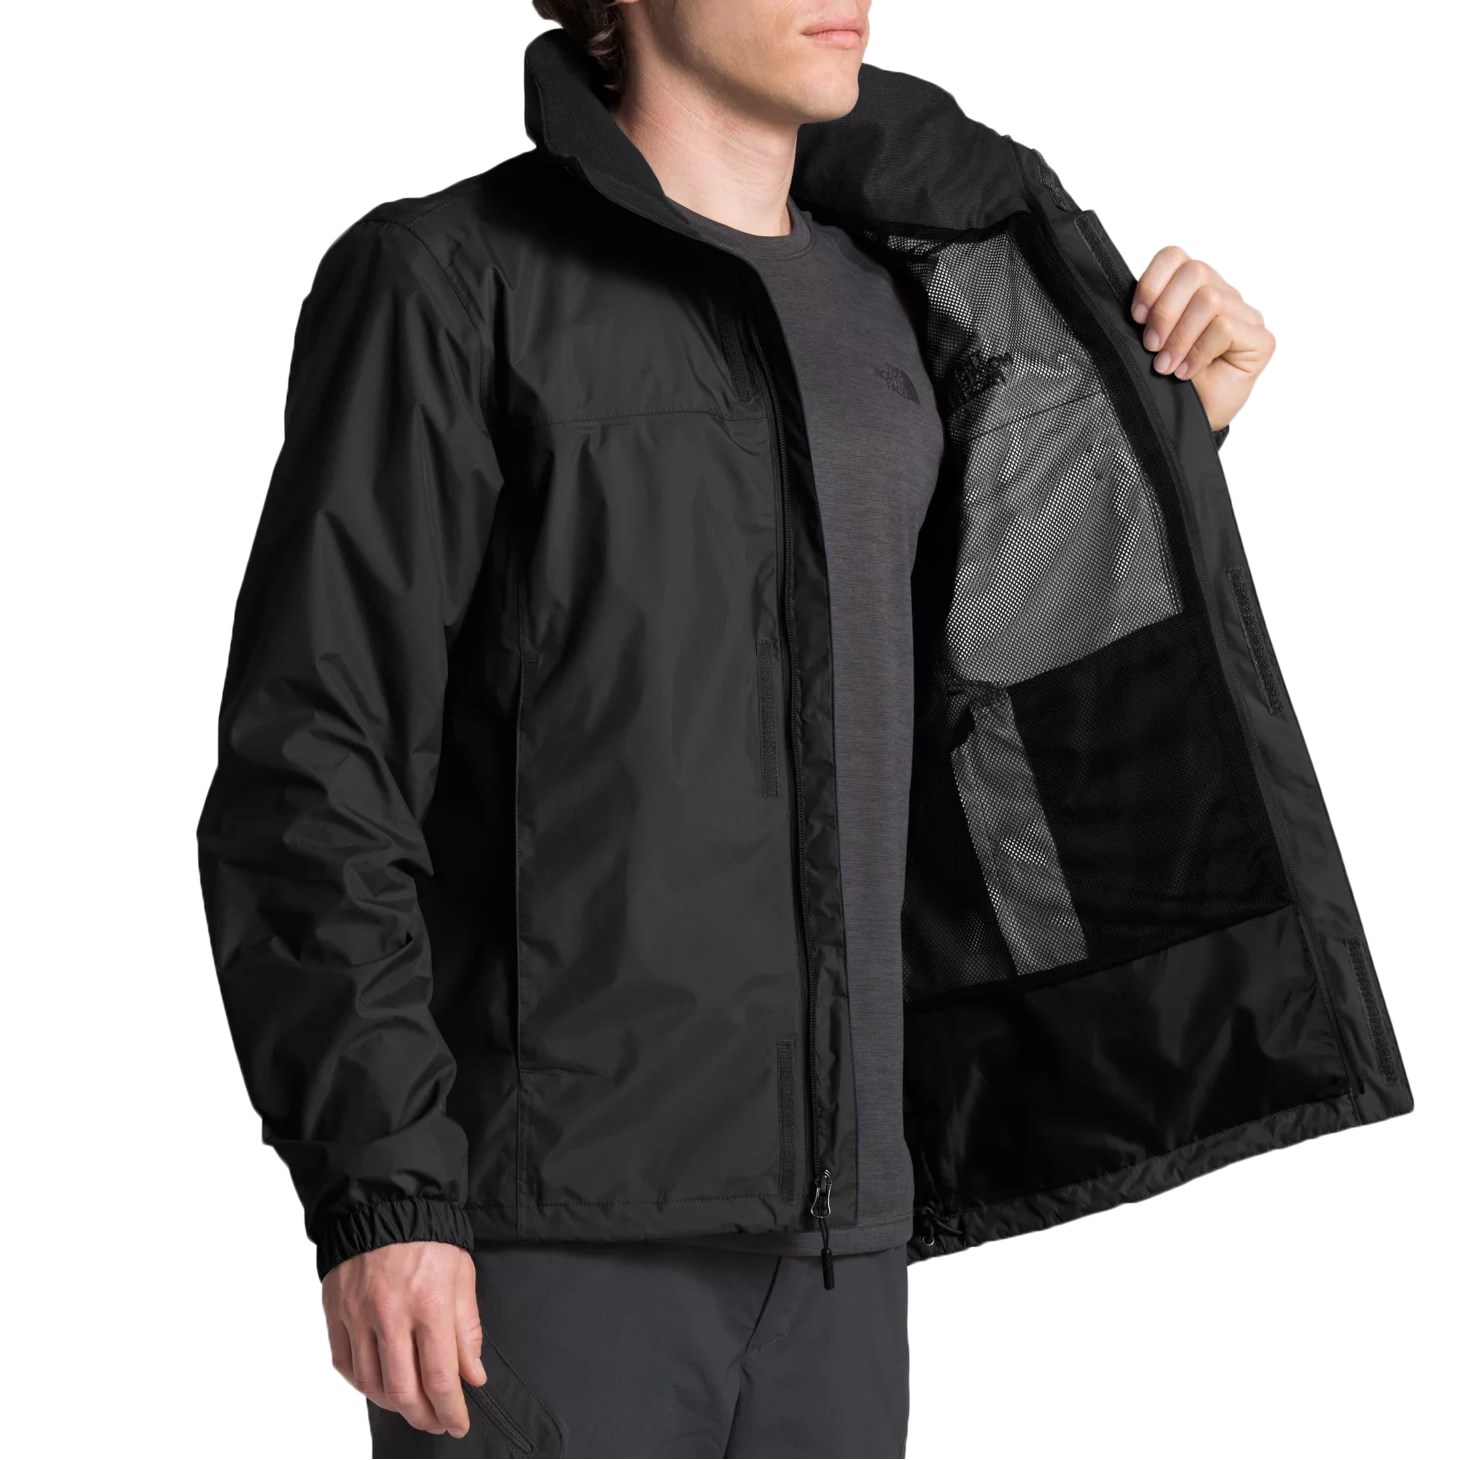 north face resolve 2 jacket review